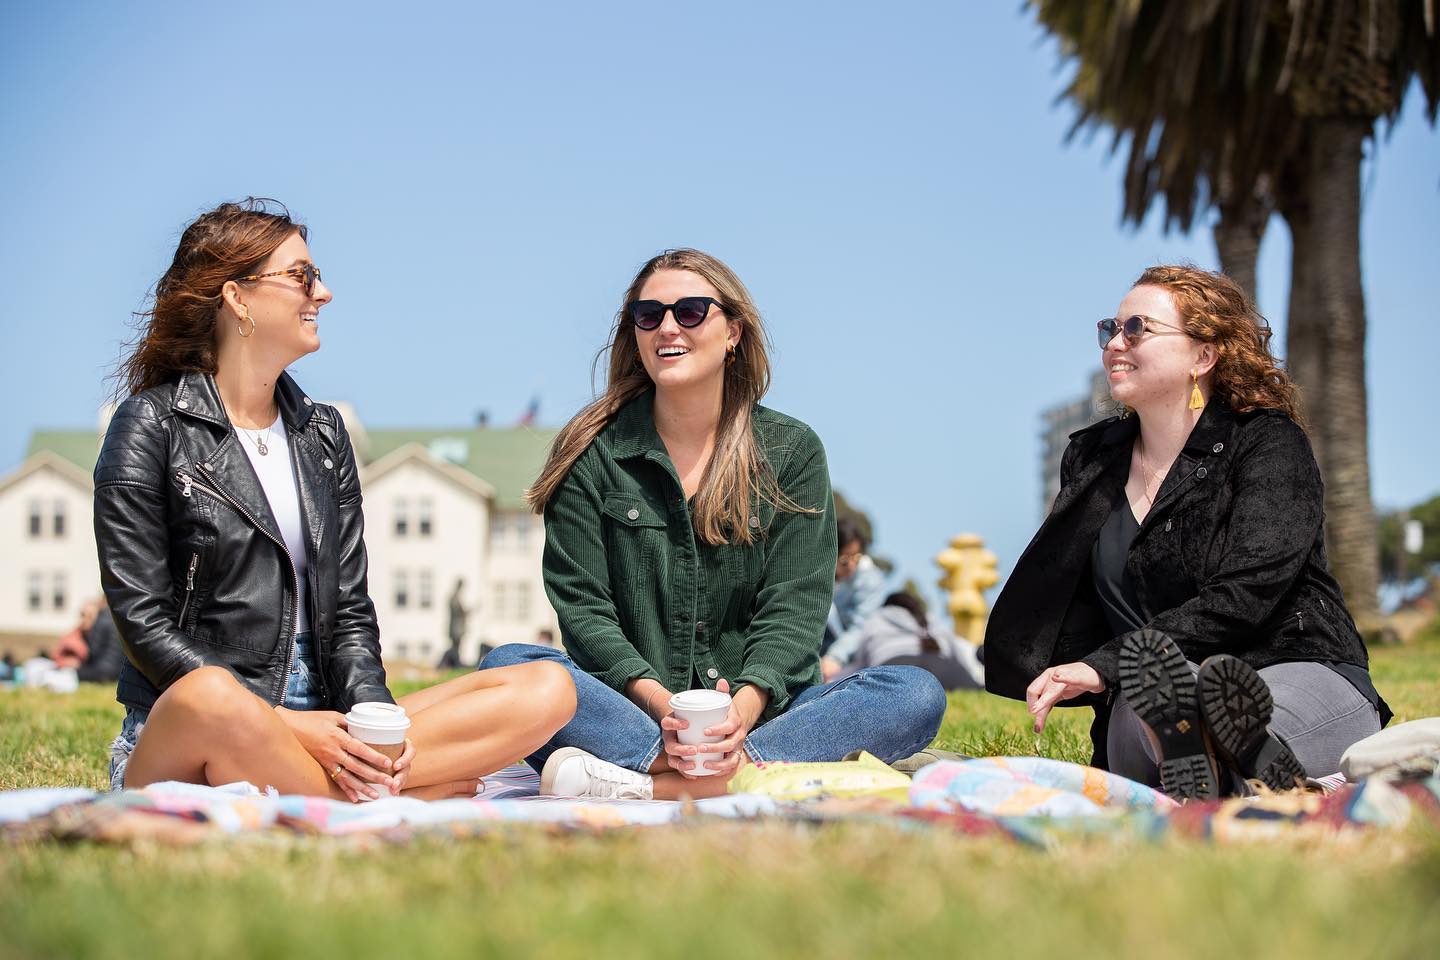 pMD emphasizes balance and encourages team members to take breaks during the day to soak up the San Francisco sun.
